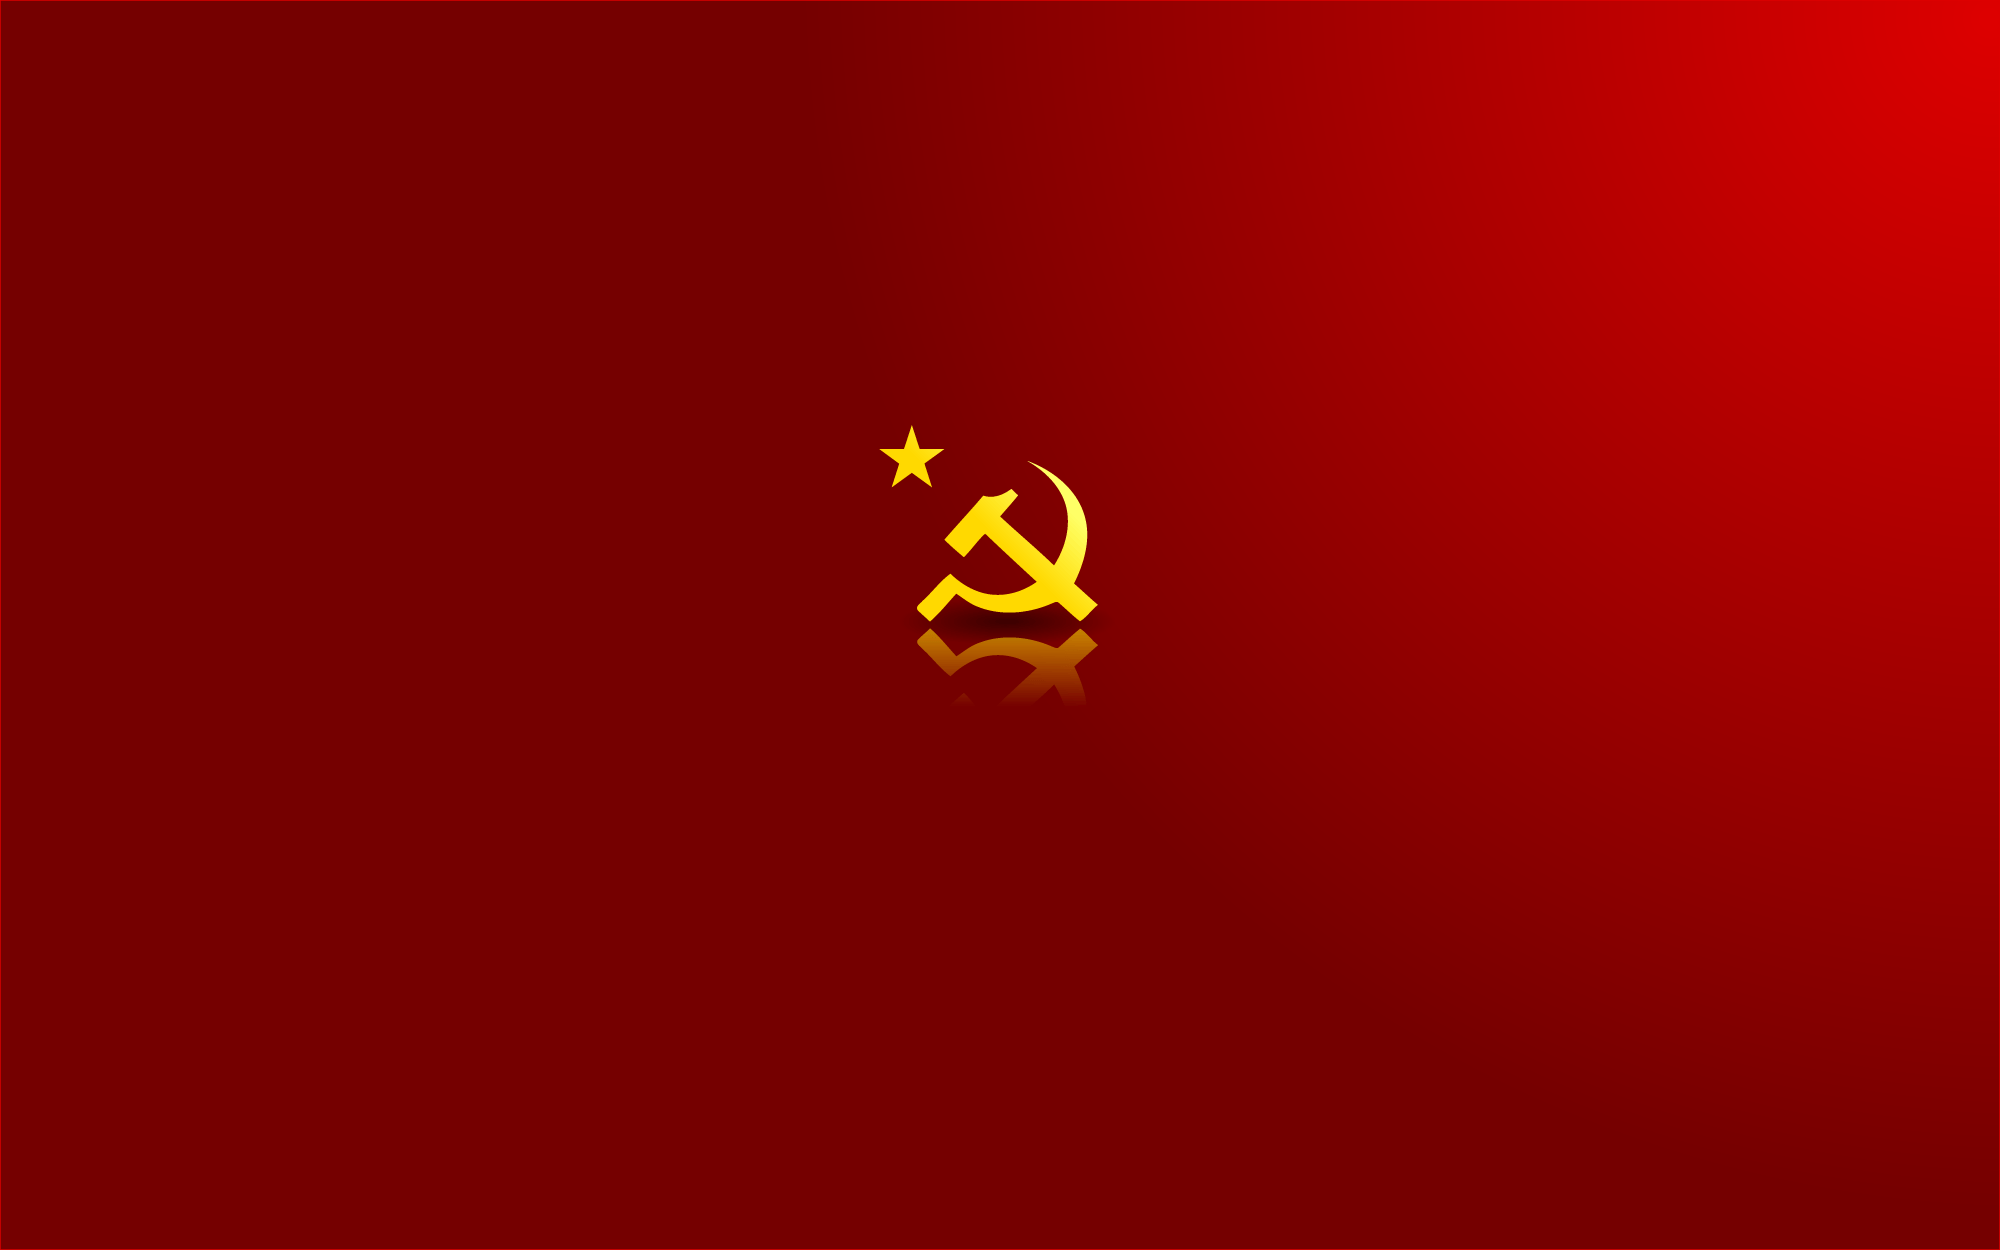 Download Russian Army With Soviet Union Flag Wallpaper | Wallpapers.com